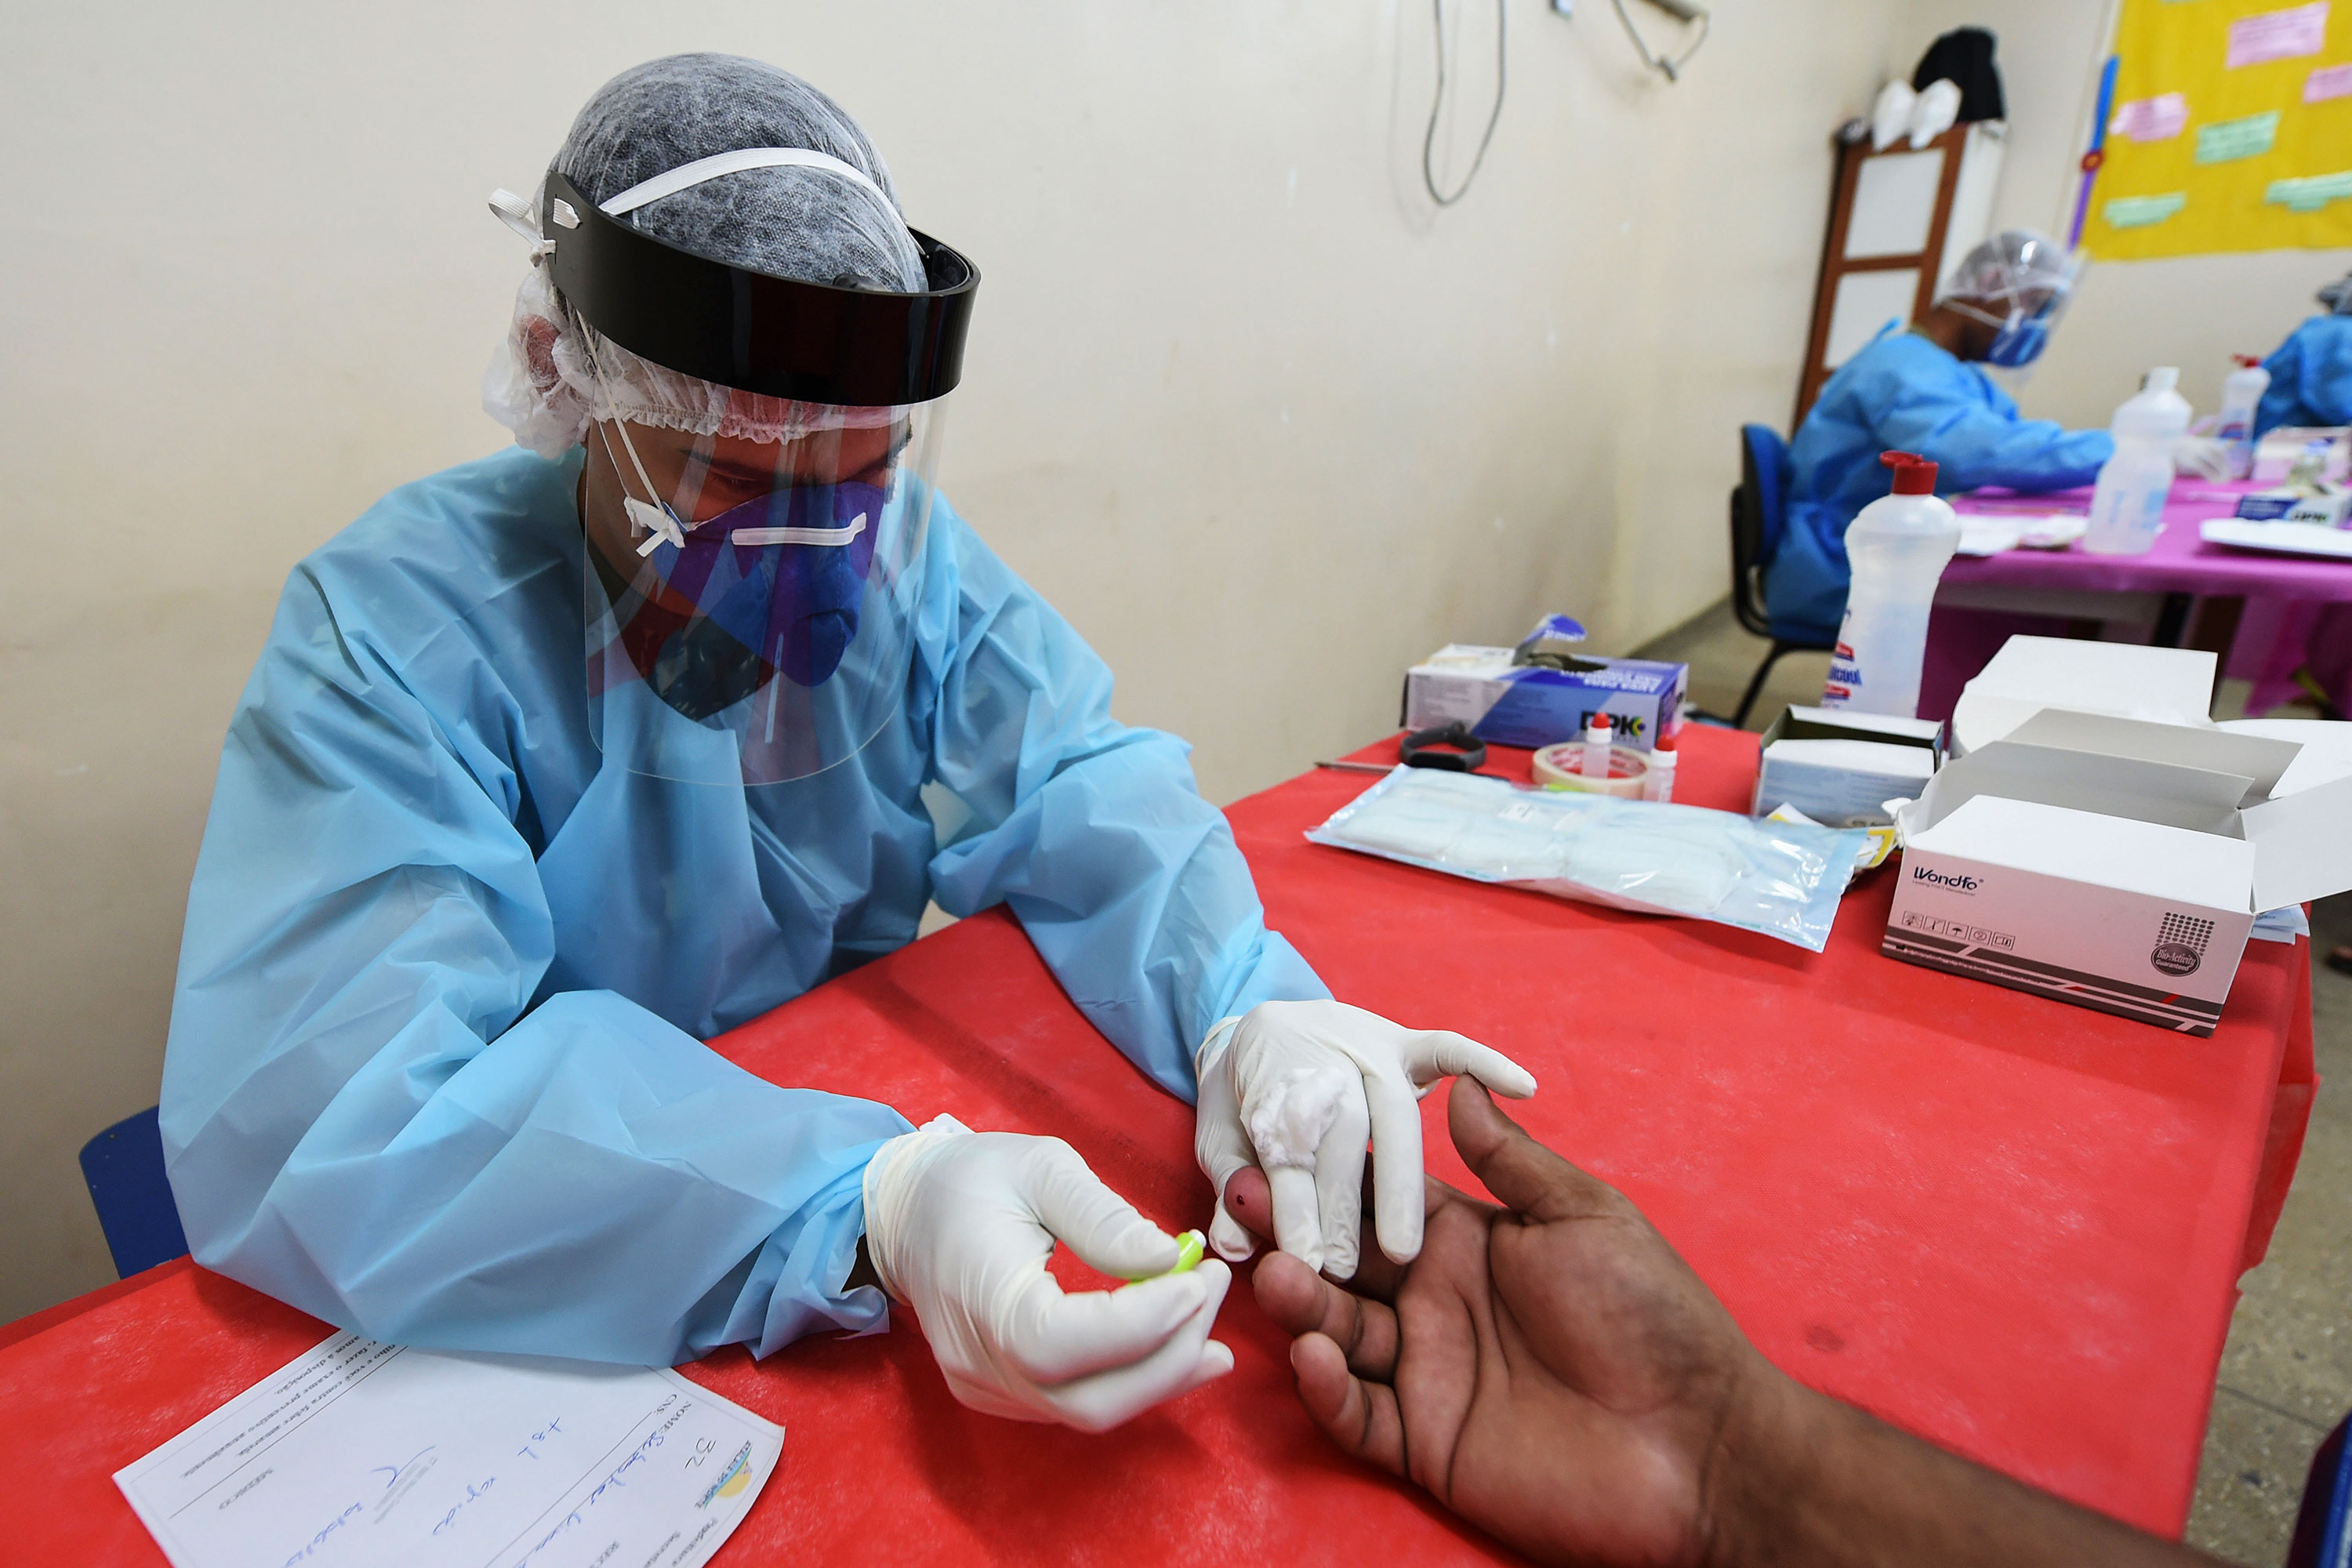 A Brazilian Armed Forces medical team member administers a coronavirus test on June 20 at a health post in Atalaia do Norte, Brazil.